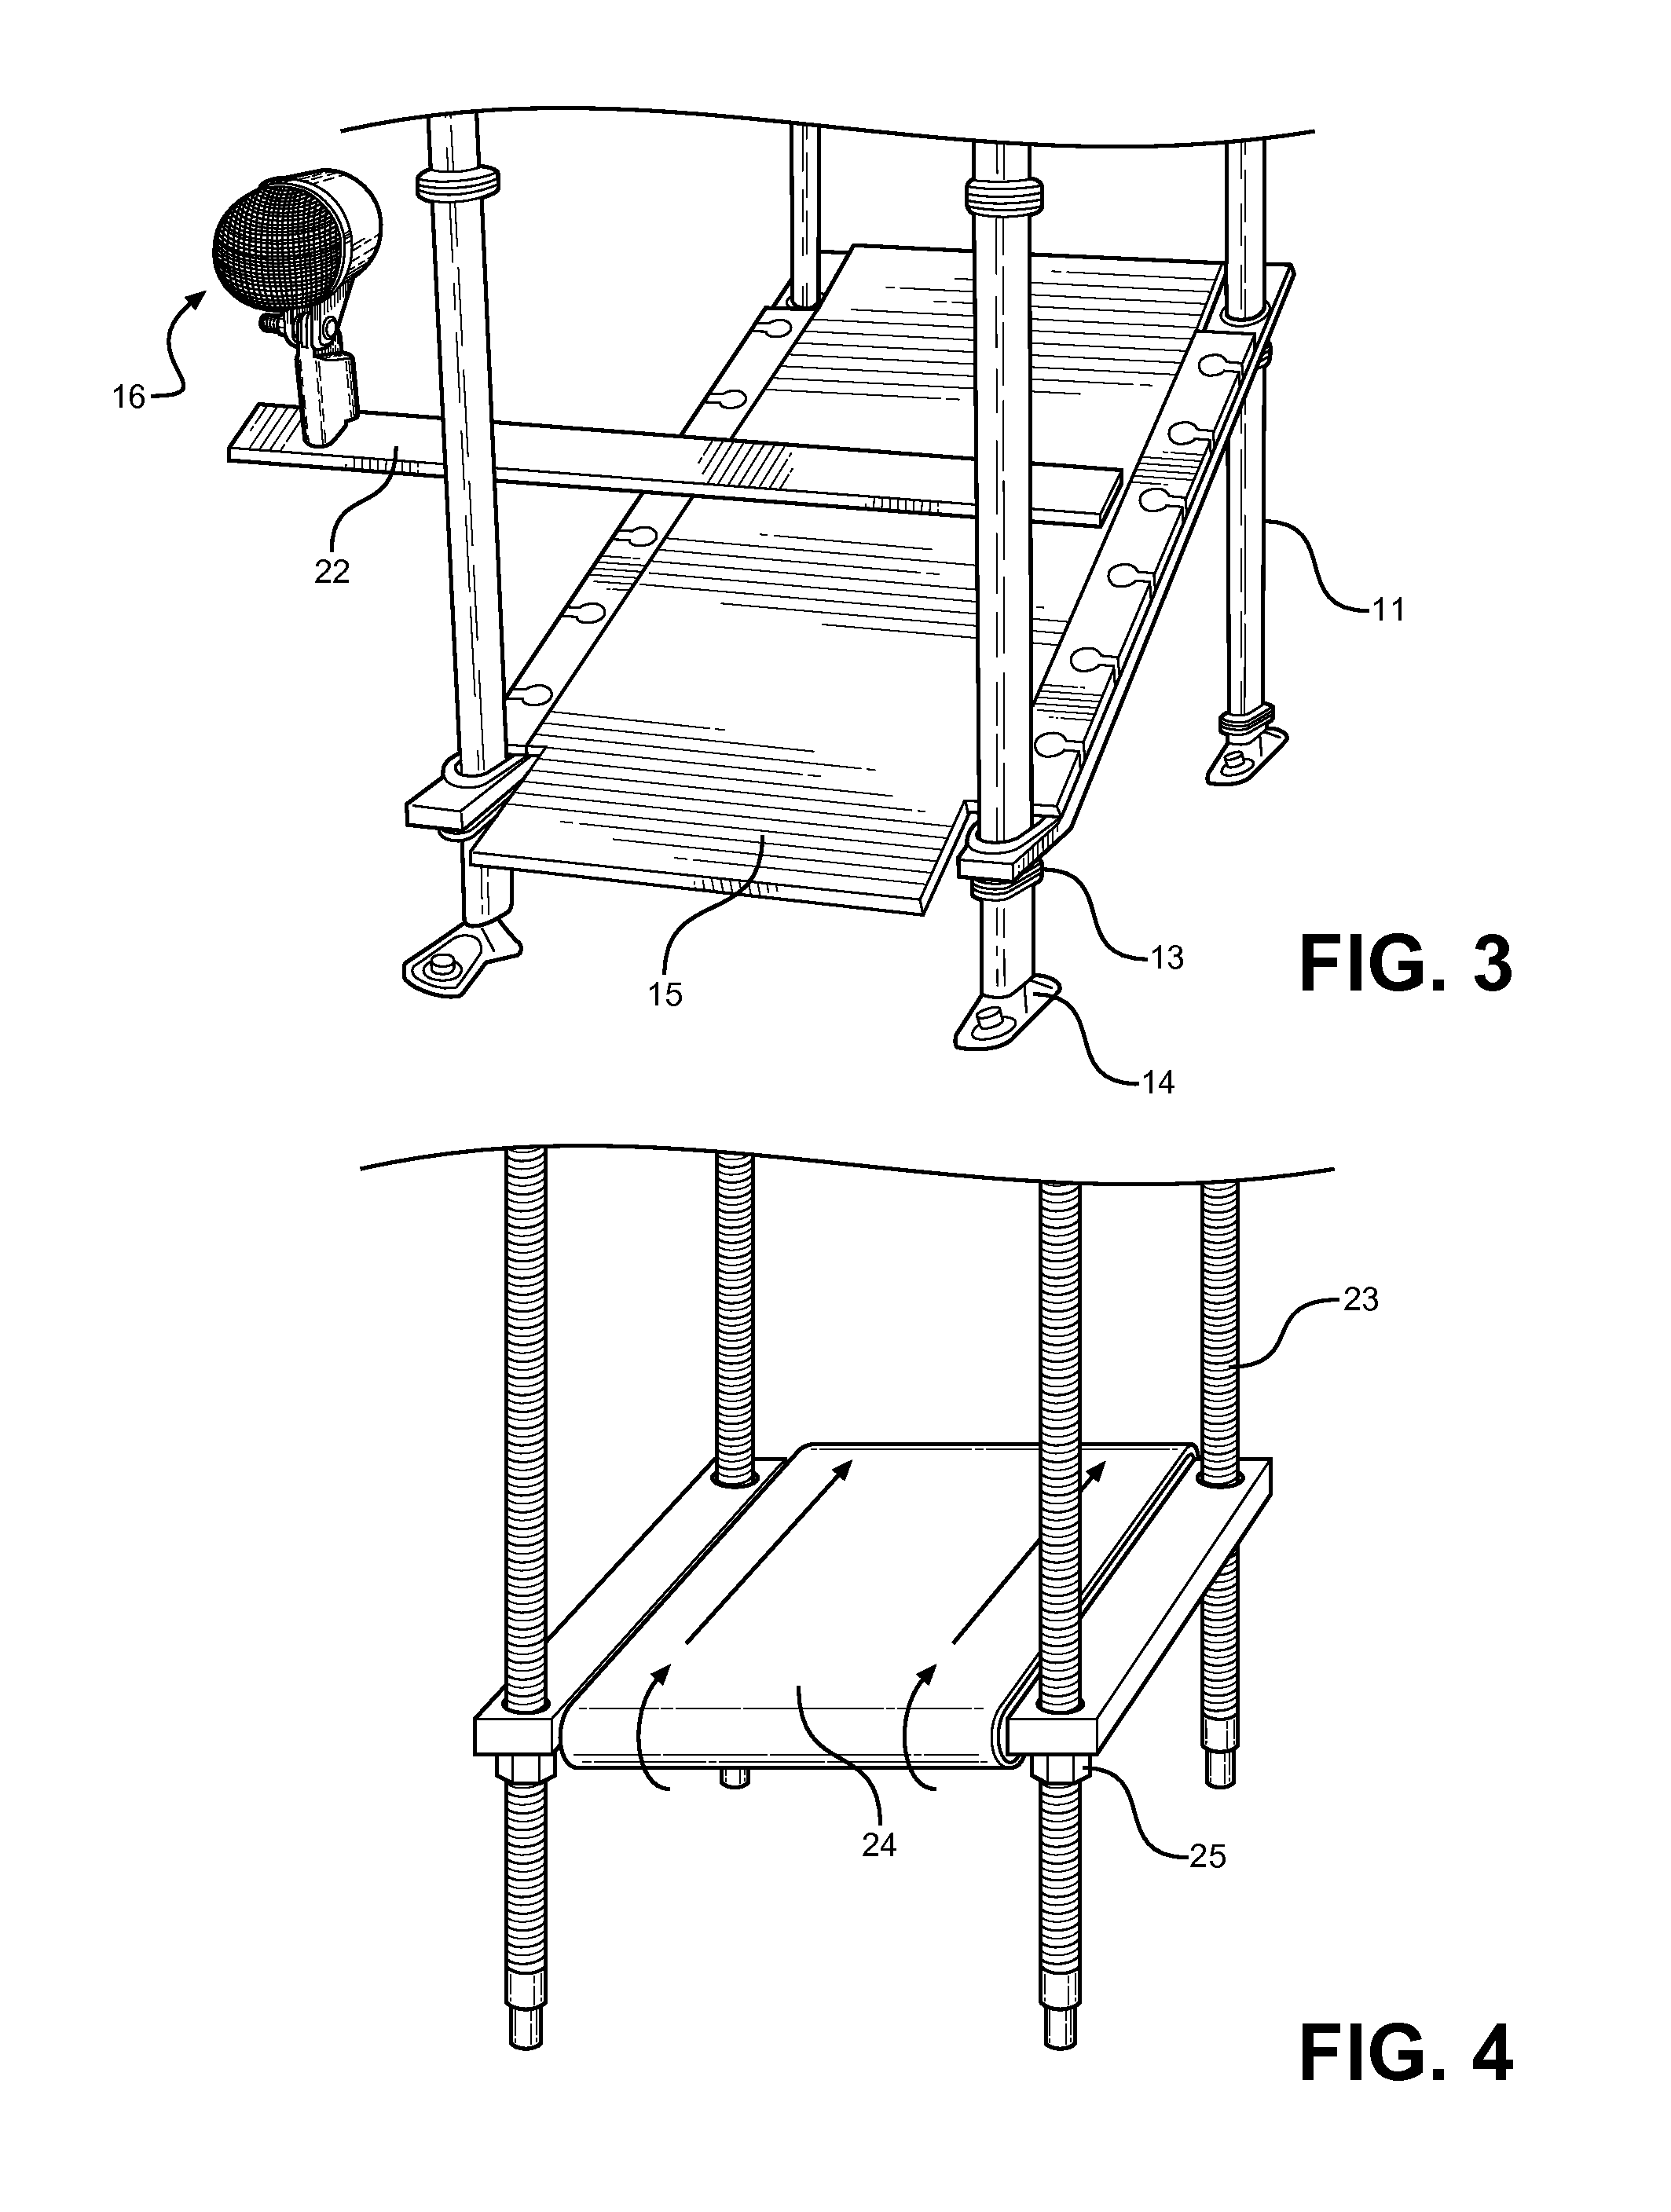 Internal Microphone Support System for Percussion Instruments